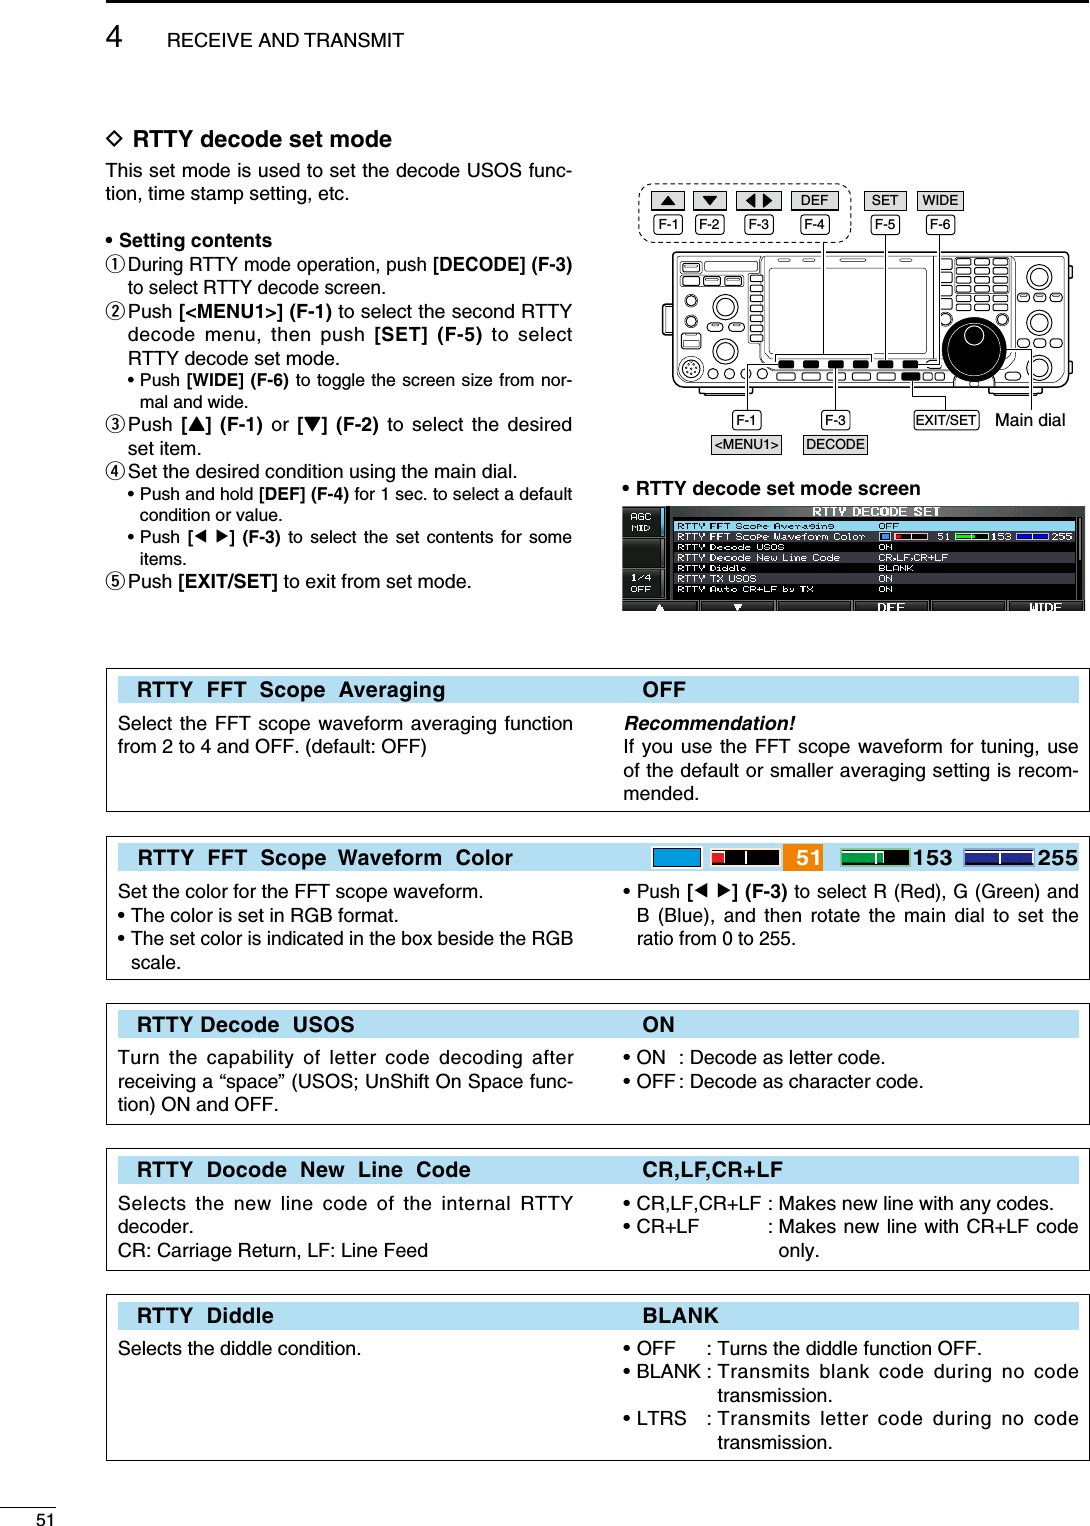 D RTTY decode set modeThis set mode is used to set the decode USOS func-tion, time stamp setting, etc.• Setting contentsq  During RTTY mode operation, push [DECODE] (F-3) to select RTTY decode screen.w  Push [&lt;MENU1&gt;] (F-1) to select the second RTTY decode menu, then push [SET] (F-5) to select RTTY decode set mode. •  Push [WIDE] (F-6) to toggle the screen size from nor-mal and wide.e  Push  [Y] (F-1) or [Z] (F-2) to select the desired set item.r Set the desired condition using the main dial. •  Push and hold [DEF] (F-4) for 1 sec. to select a default condition or value. •  Push  [Ω ≈] (F-3) to select the set contents for some items.t Push  [EXIT/SET] to exit from set mode.F-1 F-2 F-4F-3DEFEXIT/SETF-3F-6F-1F-5Main dialDECODE&lt;MENU1&gt;SET WIDE• RTTY decode set mode screen   RTTY  FFT  Scope  Averaging    OFFSelect the FFT scope waveform averaging function from 2 to 4 and OFF. (default: OFF)Recommendation!If you use the FFT scope waveform for tuning, use of the default or smaller averaging setting is recom-mended.RTTY  FFT  Scope  Waveform  Color51 153 255Set the color for the FFT scope waveform.• The color is set in RGB format.•  The set color is indicated in the box beside the RGB scale.•  Push [Ω ≈] (F-3) to select R (Red), G (Green) and B (Blue), and then rotate the main dial to set the ratio from 0 to 255.   RTTY Decode  USOS    ONTurn the capability of letter code decoding after receiving a “space” (USOS; UnShift On Space func-tion) ON and OFF.• ON  : Decode as letter code.• OFF : Decode as character code.   RTTY  Docode  New  Line  Code    CR,LF,CR+LFSelects the new line code of the internal RTTY decoder.CR: Carriage Return, LF: Line Feed• CR,LF,CR+LF : Makes new line with any codes.• CR+LF  :  Makes new line with CR+LF code only.   RTTY  Diddle    BLANKSelects the diddle condition. • OFF  : Turns the diddle function OFF.• BLANK :  Transmits blank code during no code transmission.• LTRS  :  Transmits letter code during no code transmission.514RECEIVE AND TRANSMIT